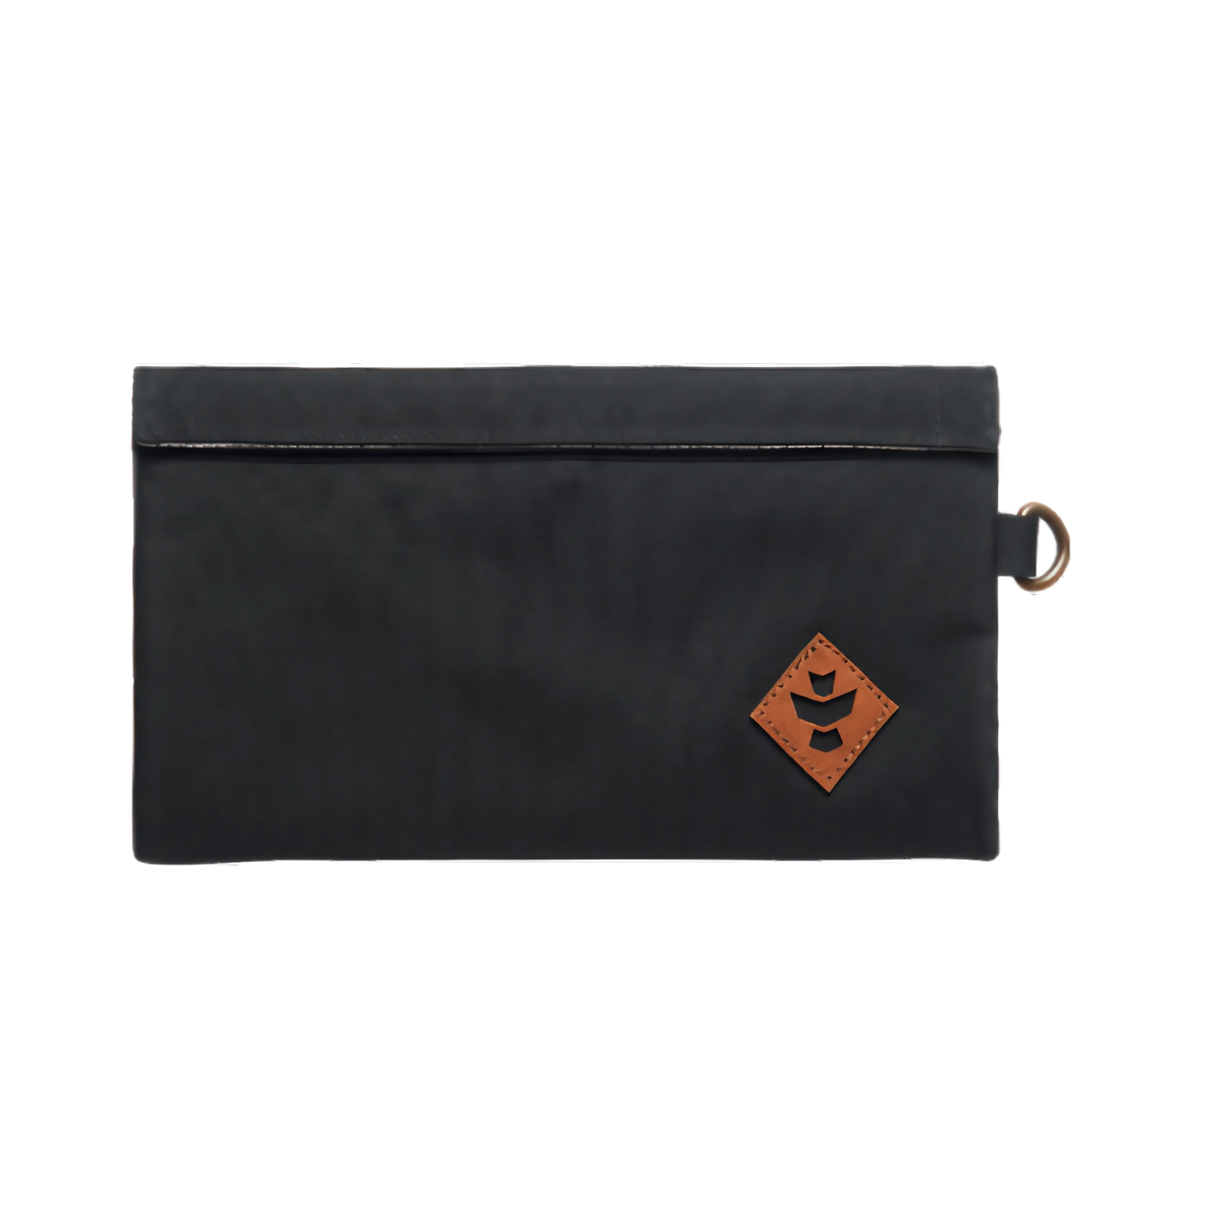 Revelry Supply Confidant black silicone pouch front view with logo and keychain loop